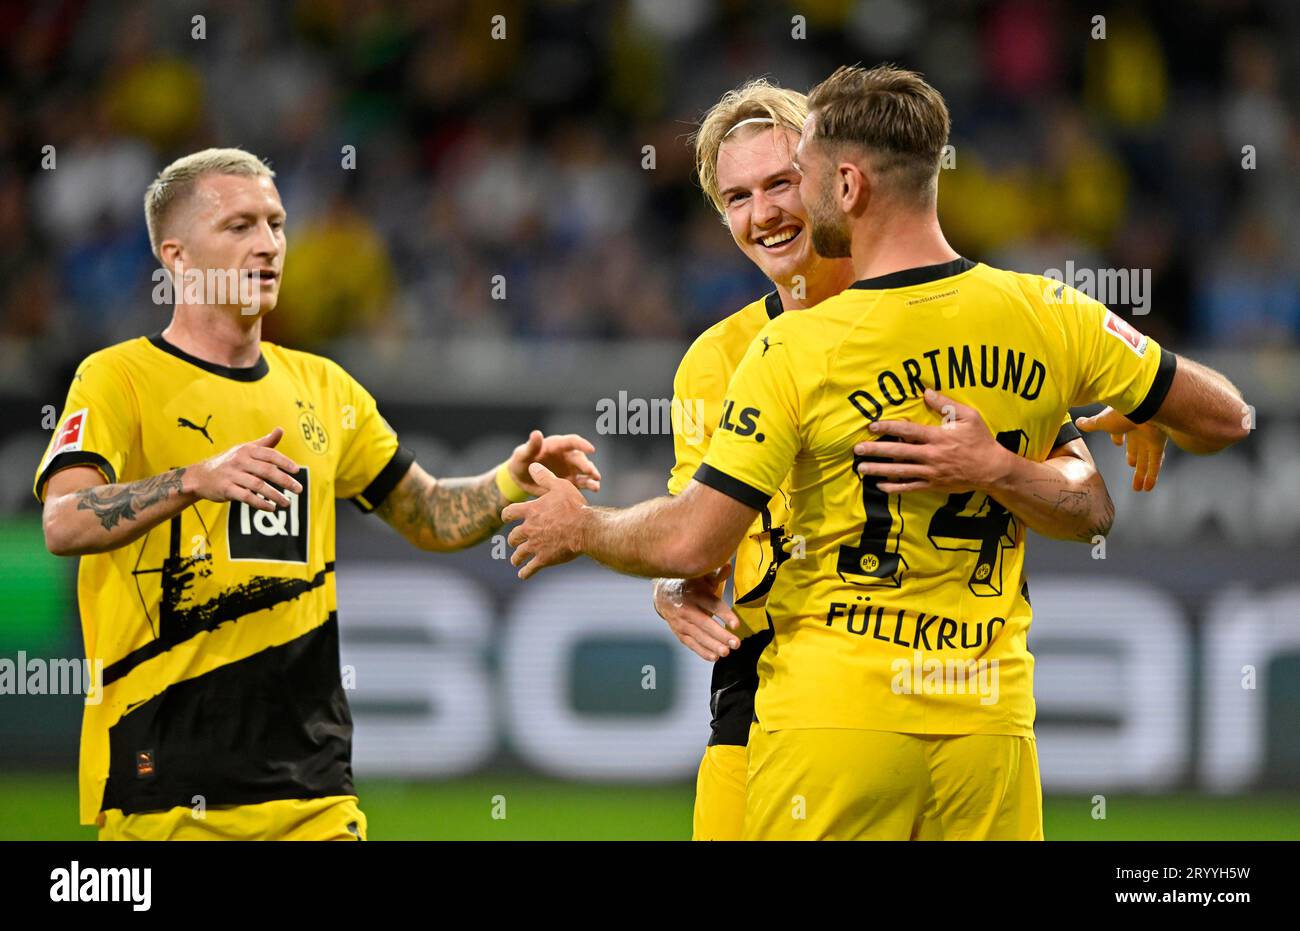 Stadion des bvb hi-res stock photography and images - Alamy